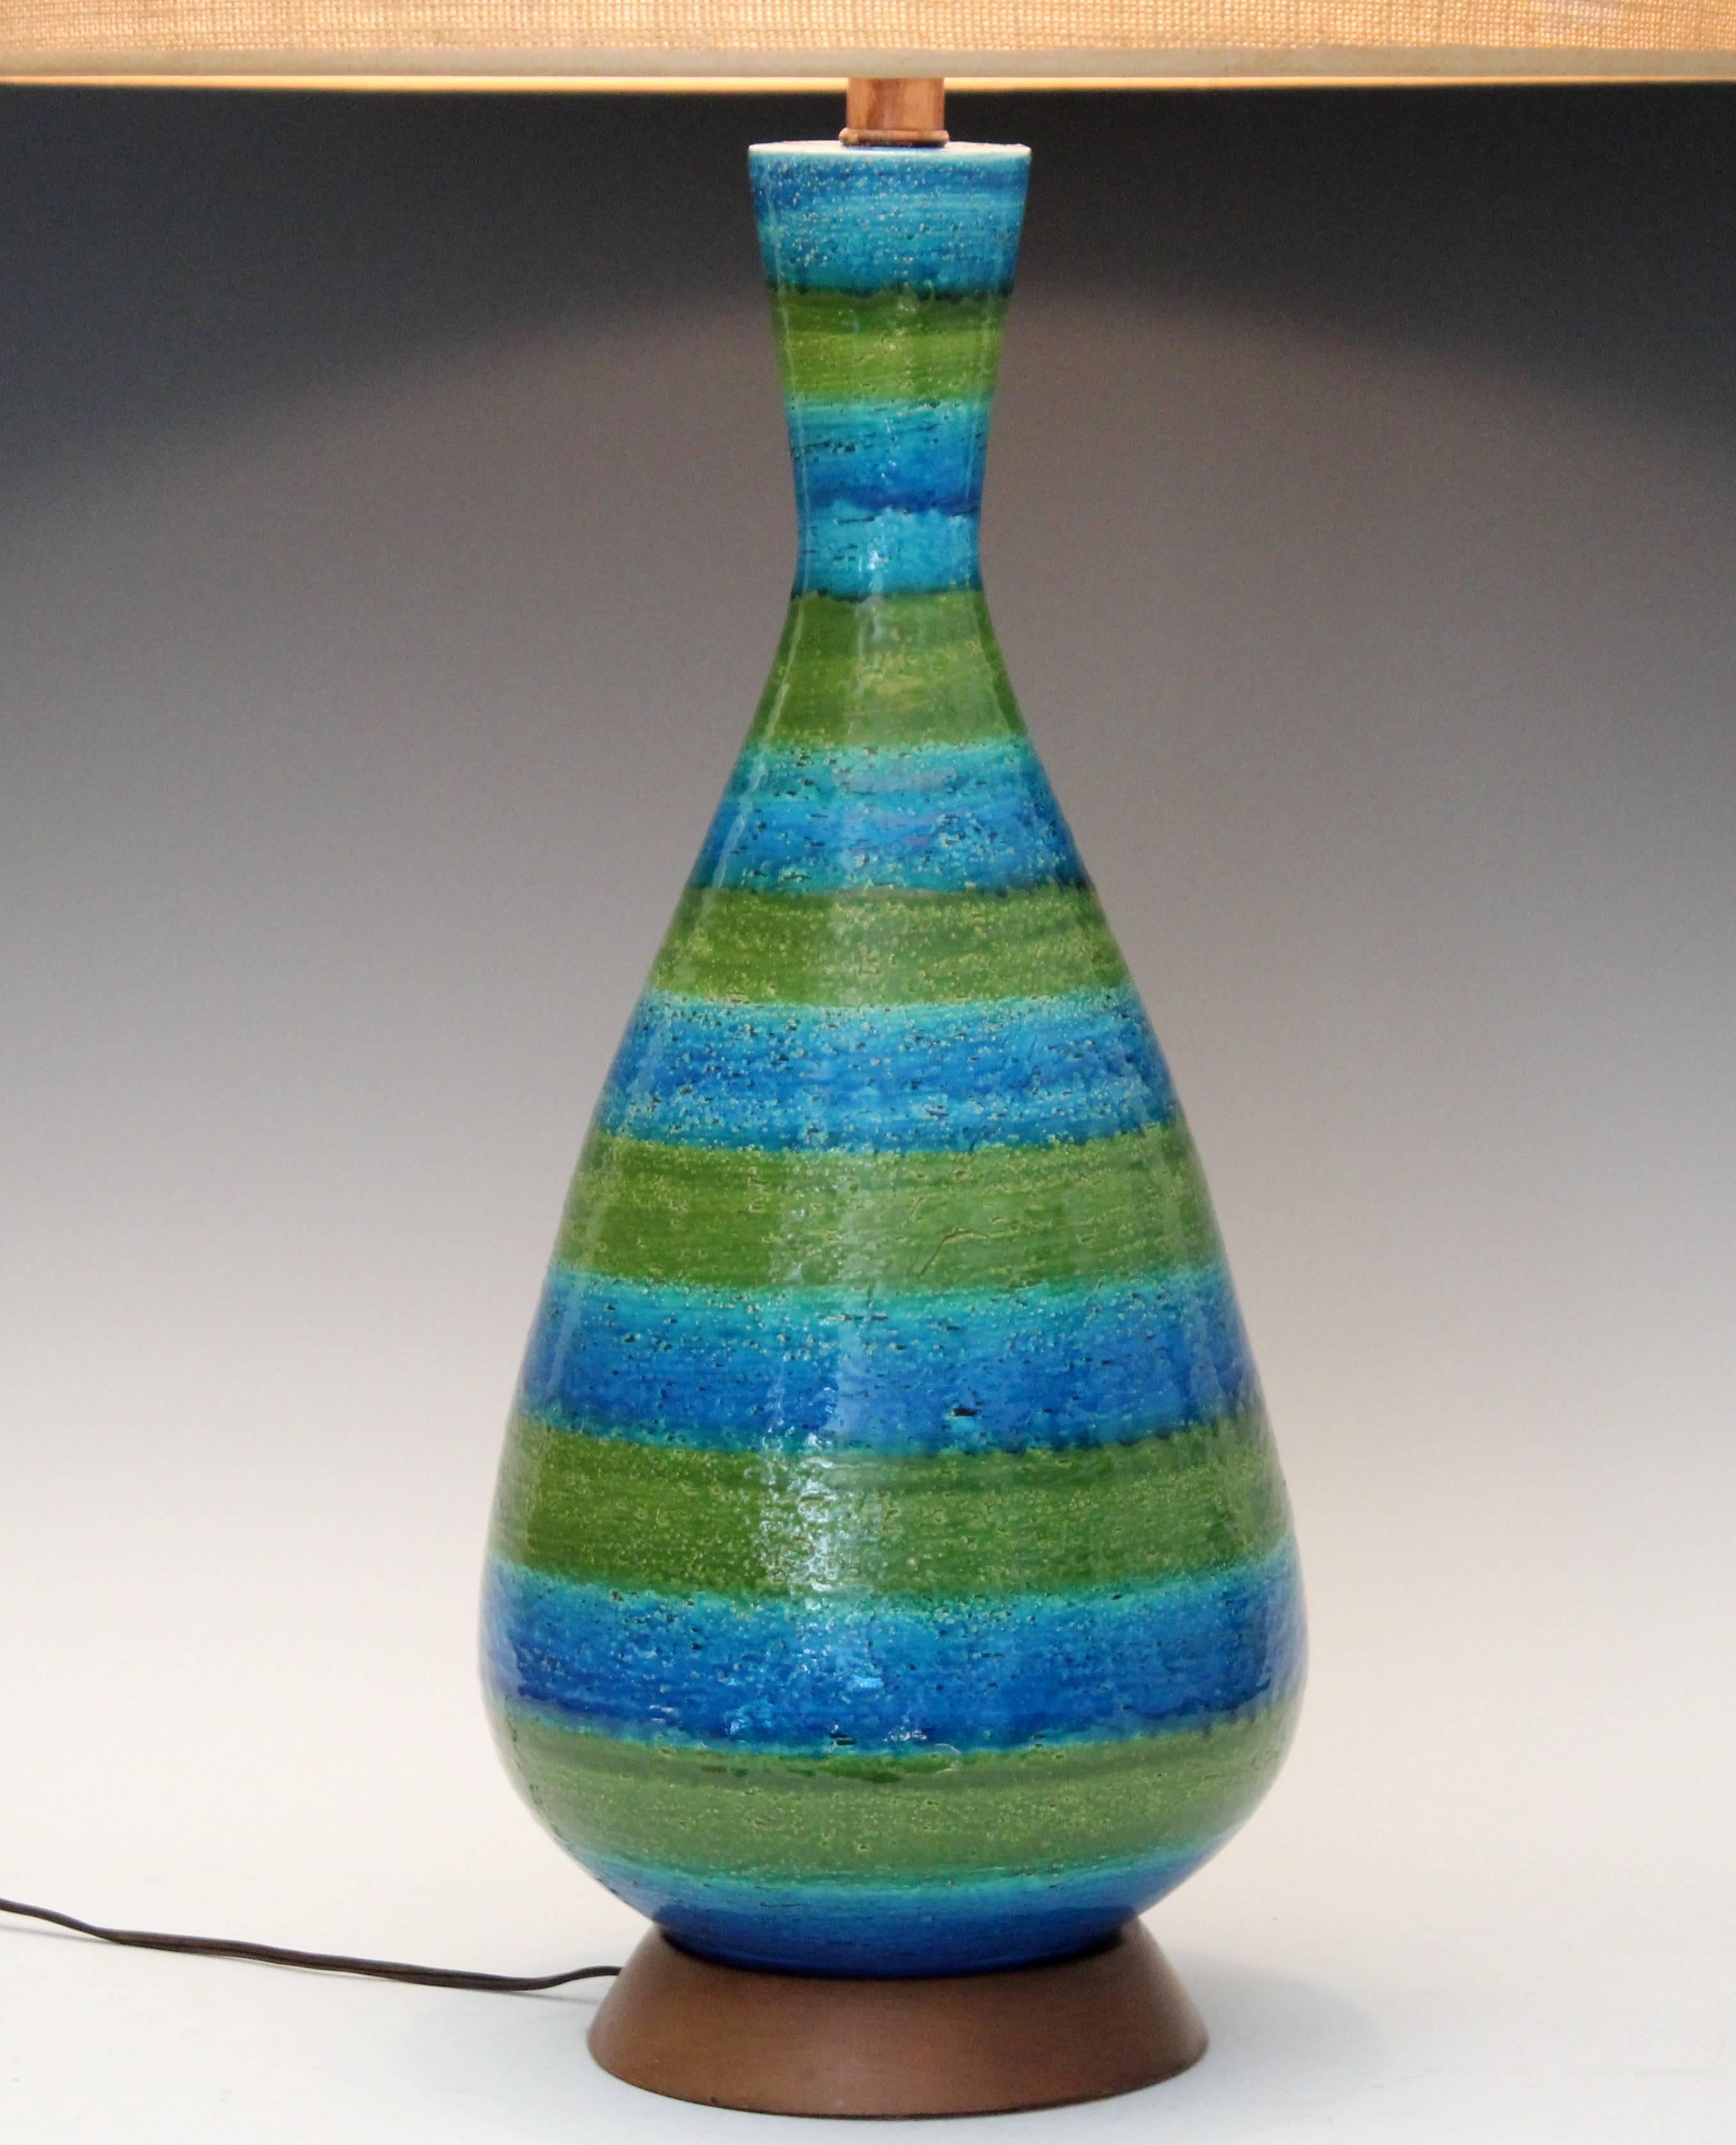 Large hand-turned Bitossi bottle form lamp with alternating bands of green and blue glaze, circa 1960s. Three-way switch. 35" high overall, 20 1/4" to top of pottery, 9" diameter. Shade not included, please inquire for